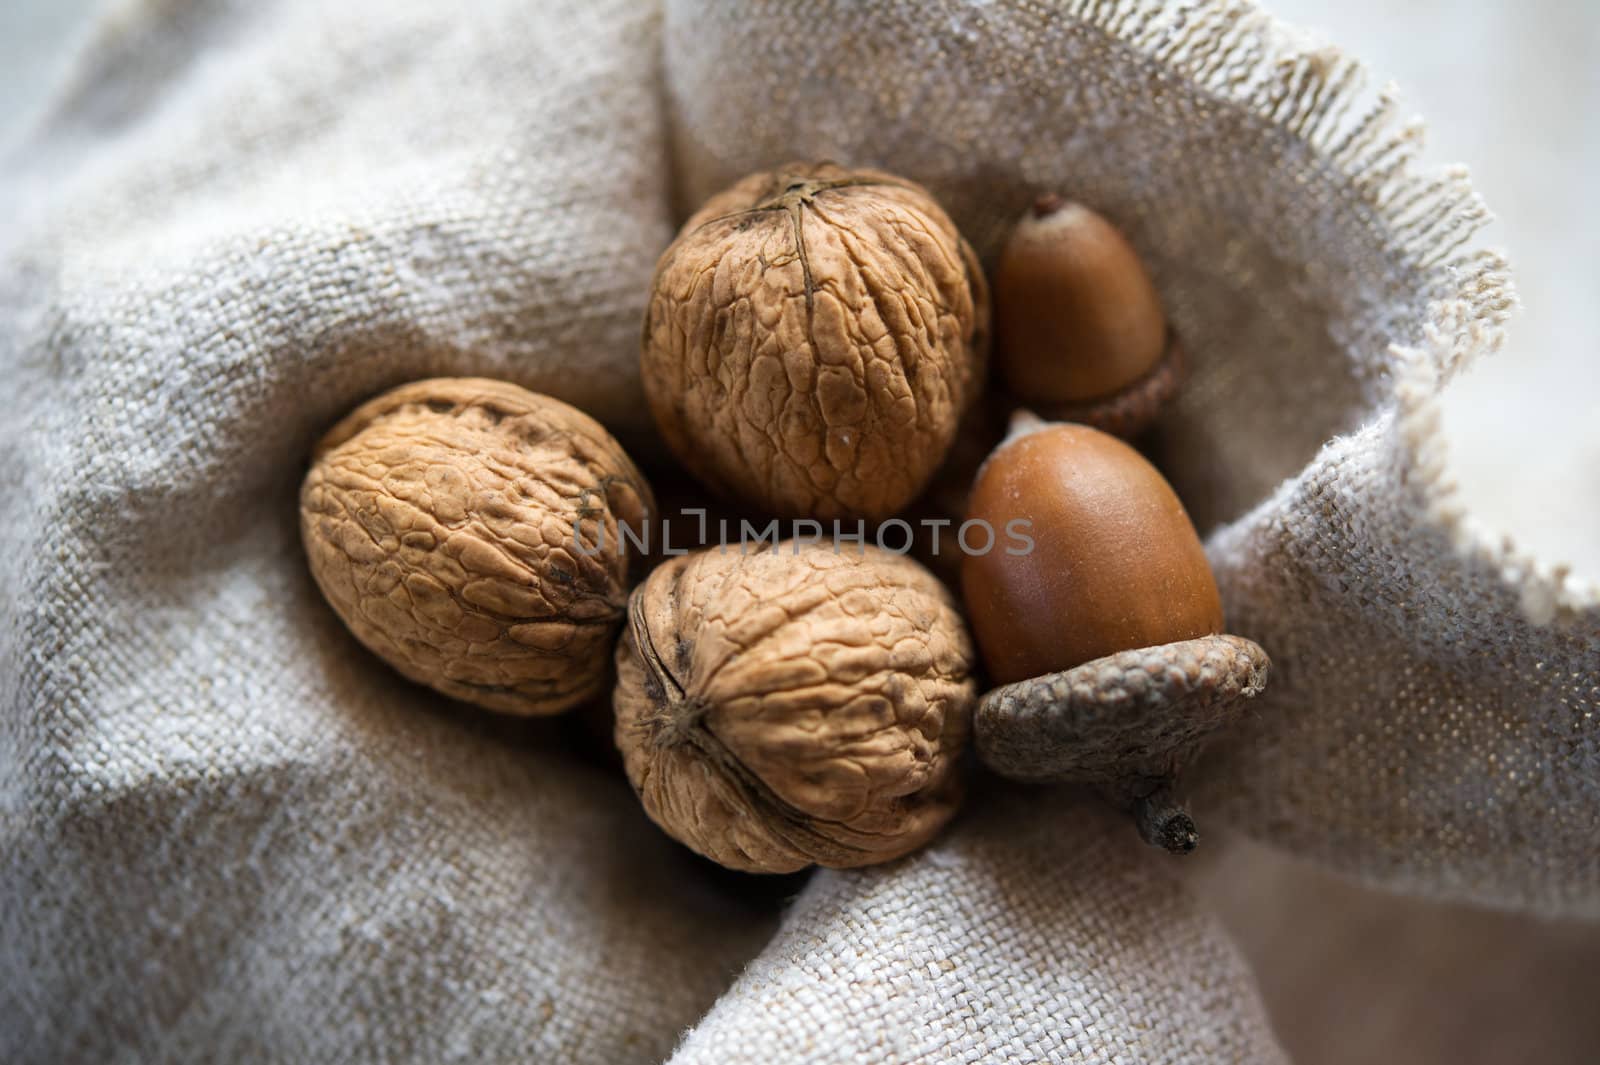 Still-life of the three acorns and walnuts laying on a canvas. Shallow DOF